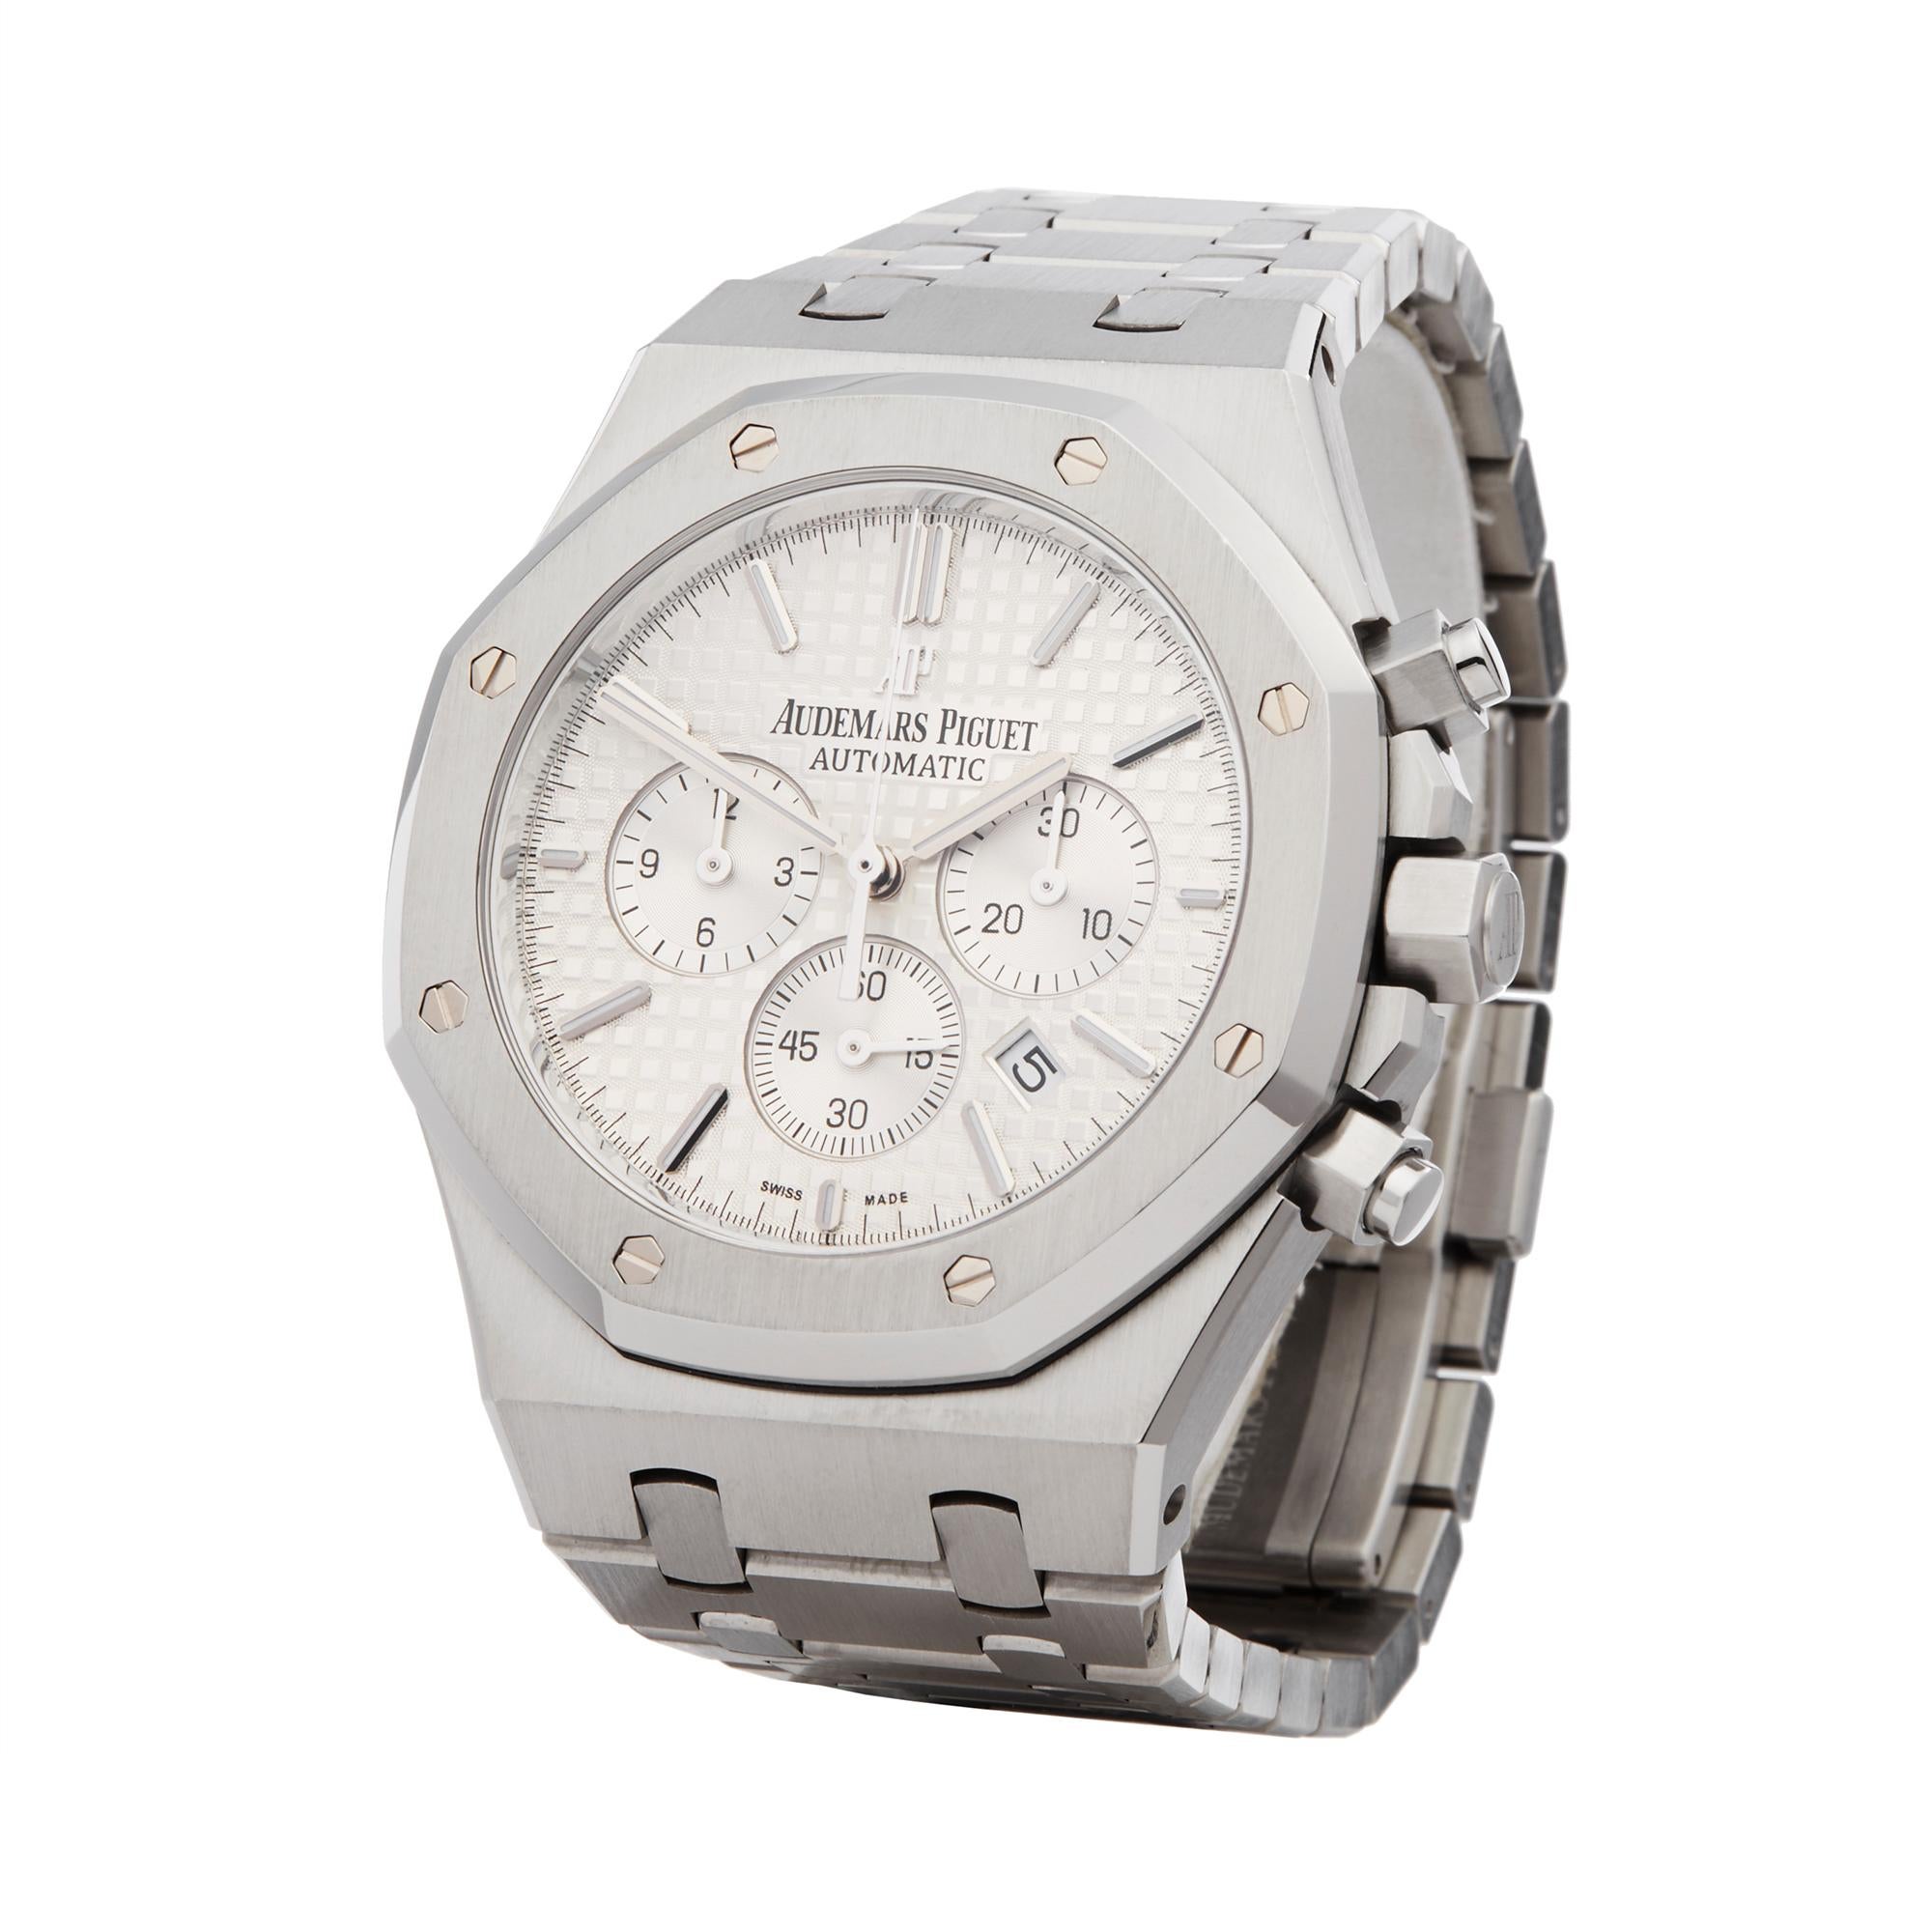 Ref: W6227
Manufacturer: Audemars Piguet
Model: Royal Oak
Model Ref: 26320ST.OO.1220ST.02
Age: 7th February 2016
Gender: Mens
Complete With: Xupes Presentation Box & Guarantee
Dial: White Baton
Glass: Sapphire Crystal
Movement: Automatic
Water